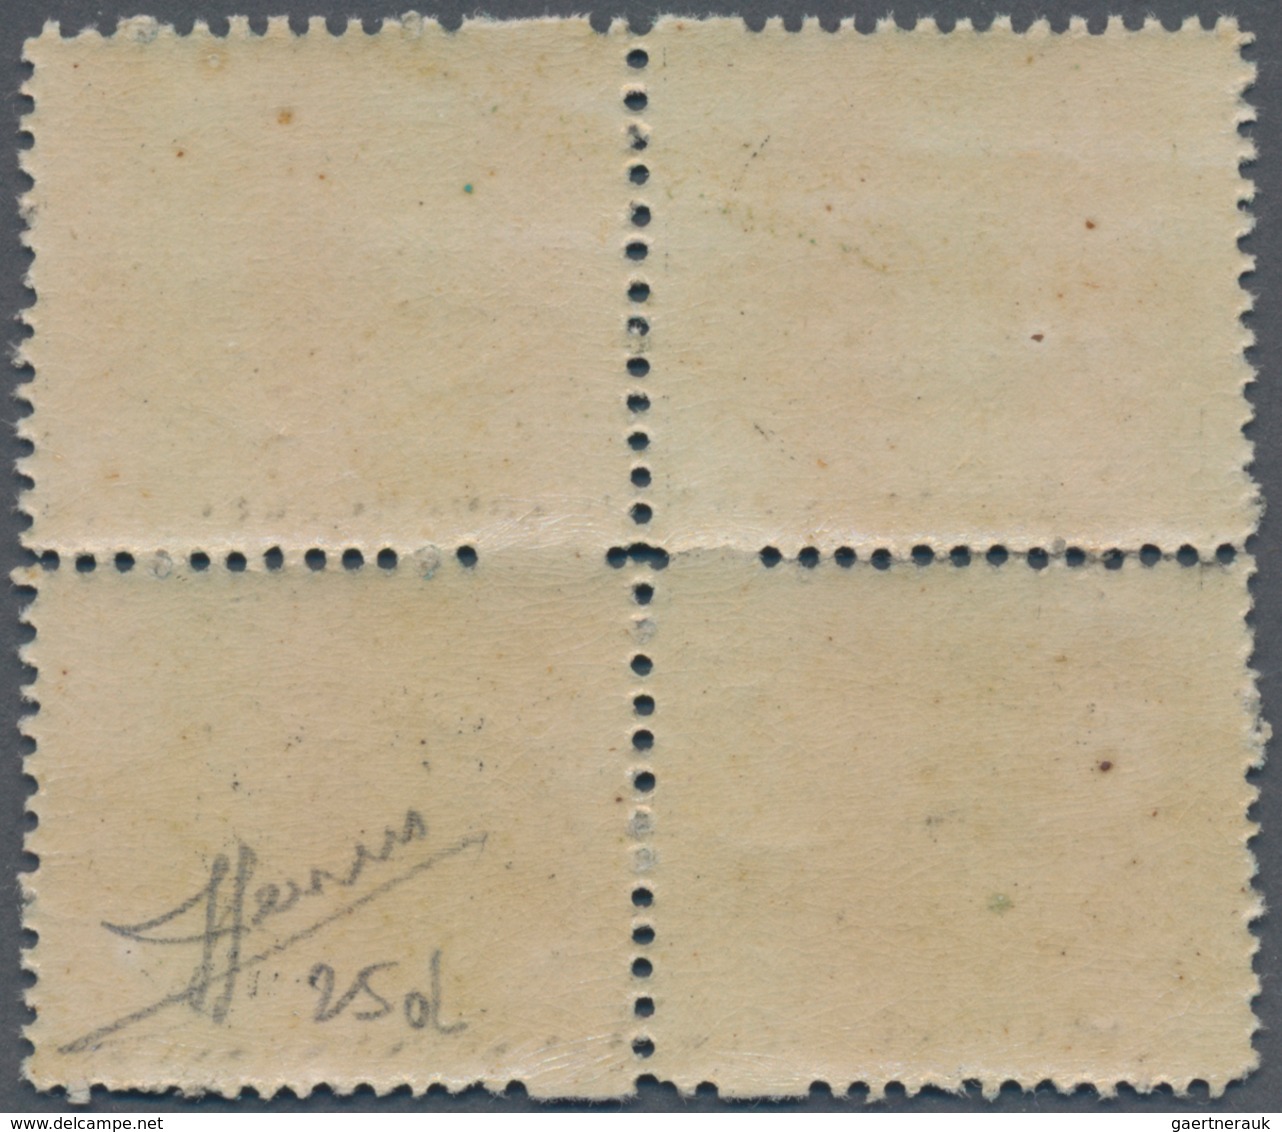 Italien - Altitalienische Staaten: Kirchenstaat: 1868, 5 C Blue Block Of Four Mint Never Hinged, The - Papal States